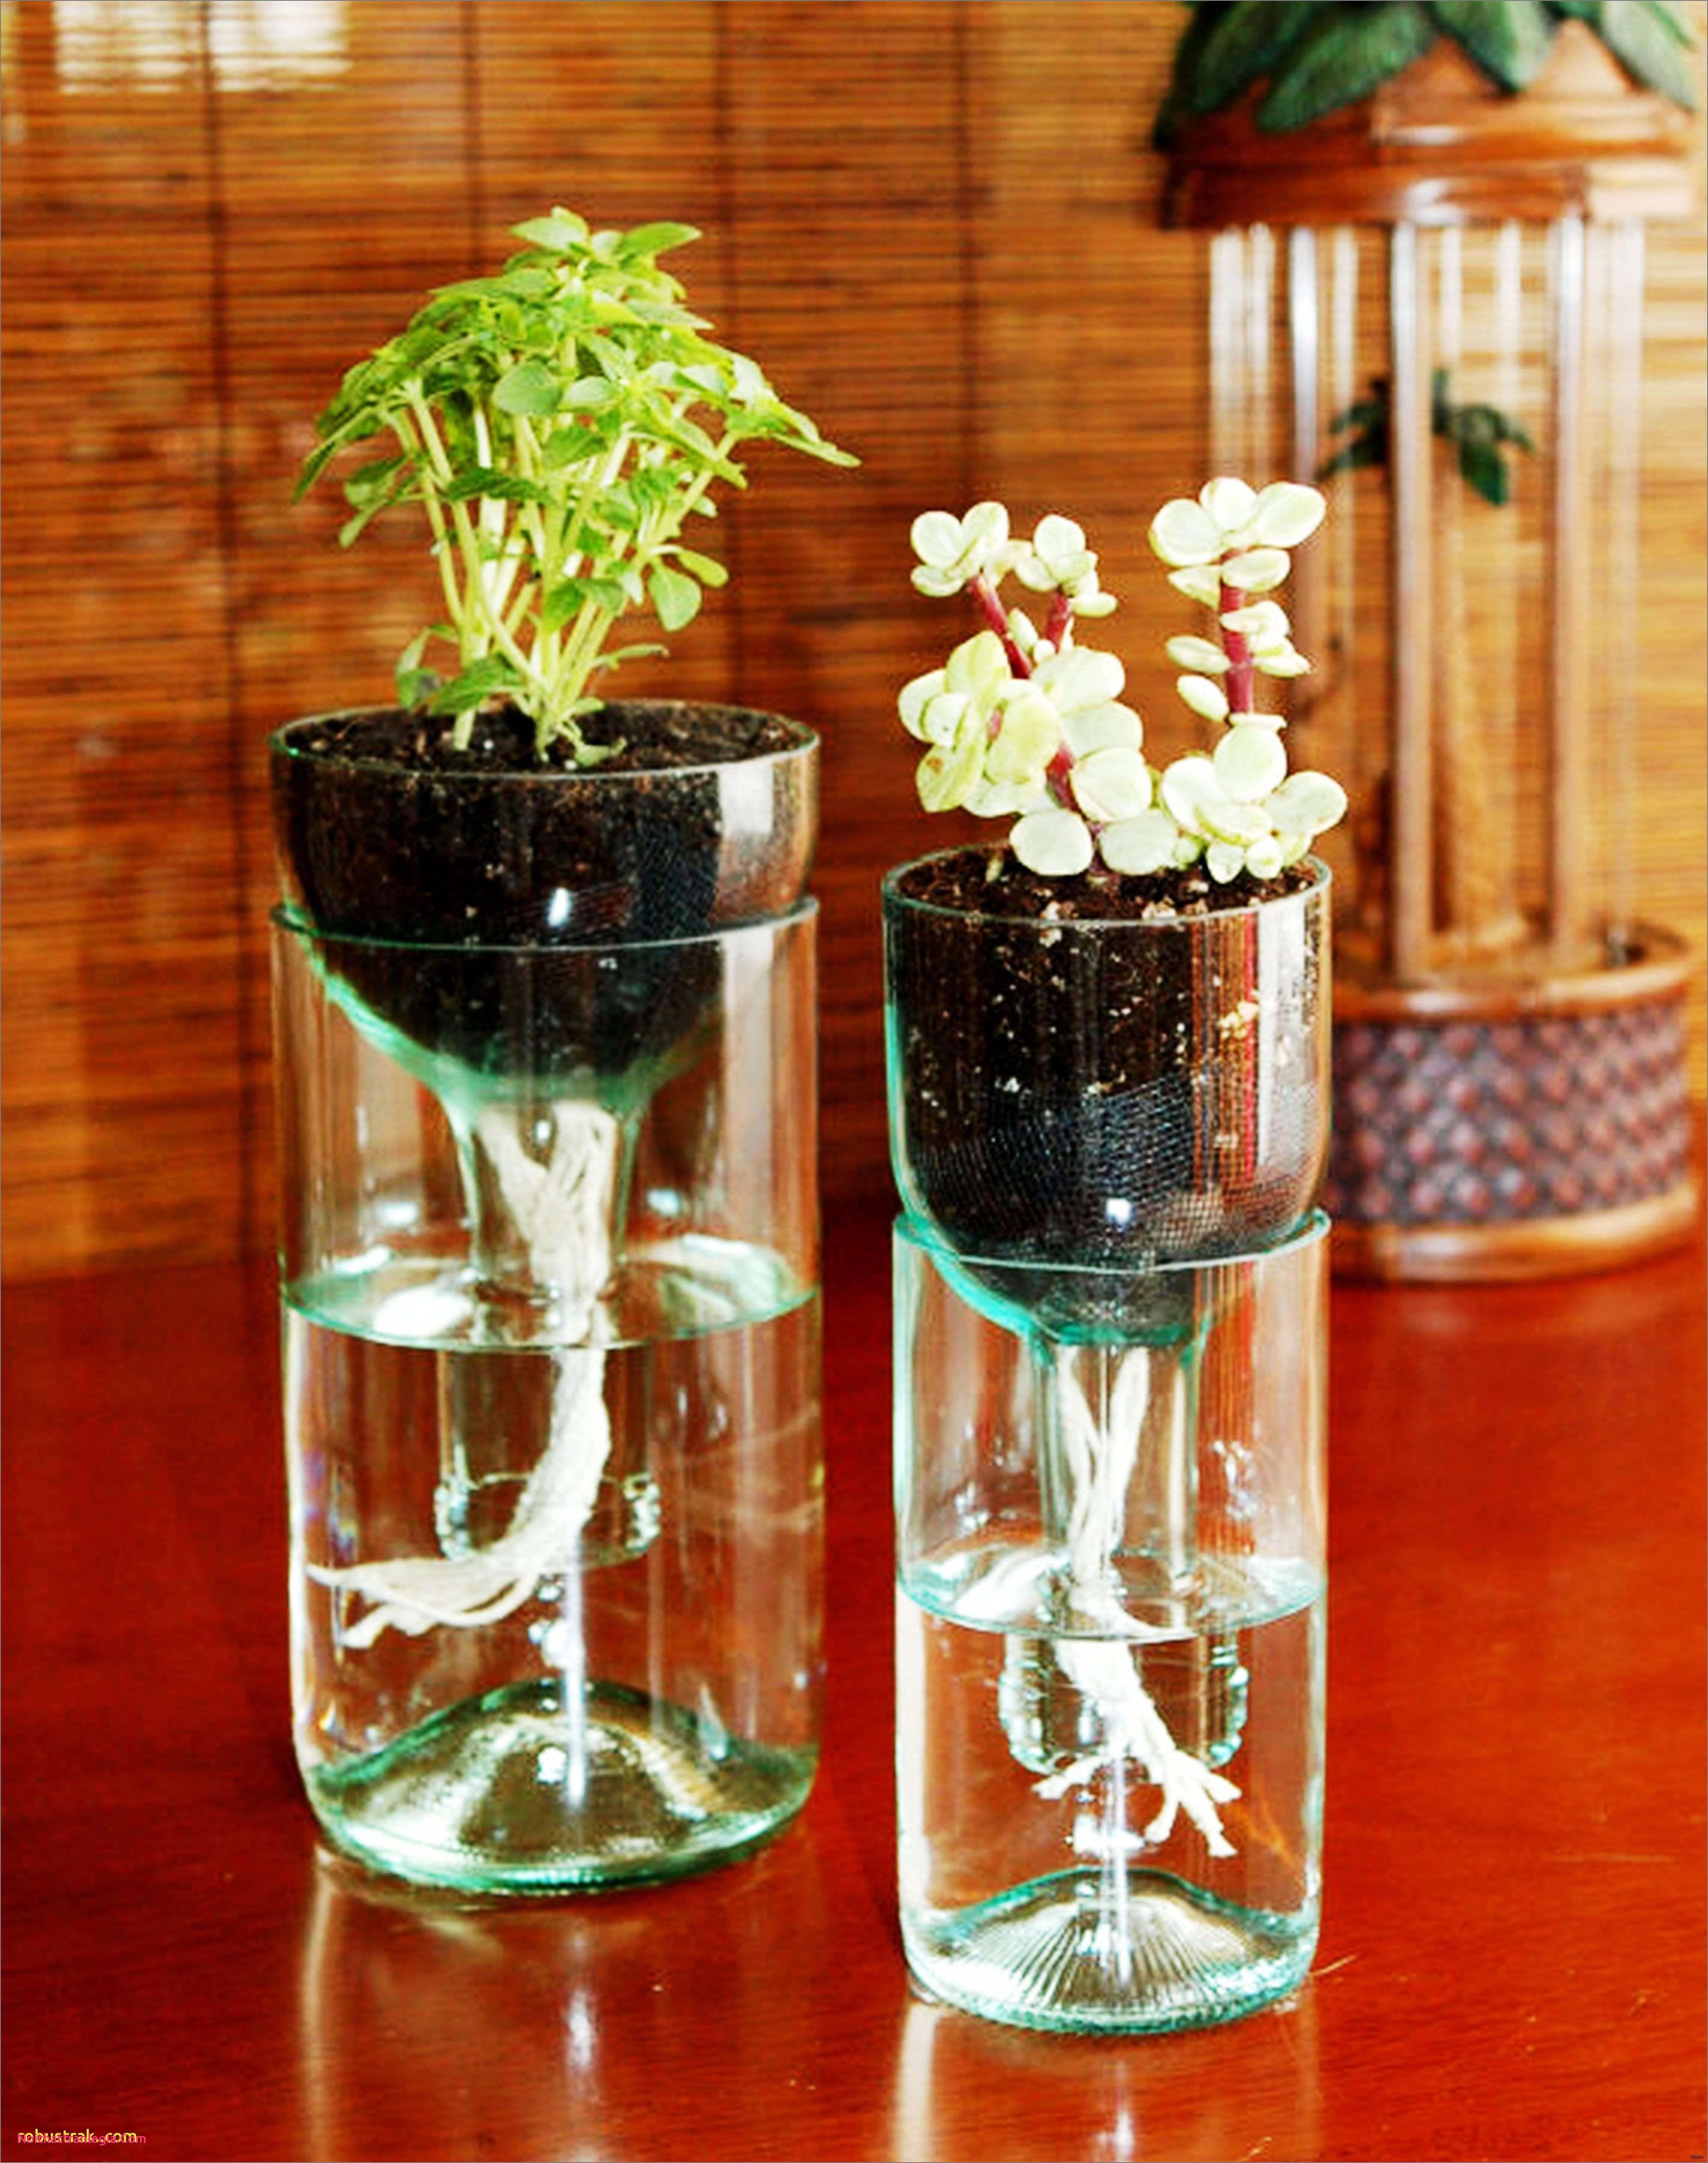 24 Awesome Square Glass Wall Vase 2023 free download square glass wall vase of 20 how to make mercury glass vases noithattranlegia vases design within glass bowl centerpiece decorating ideas awesome unique glass bowl centerpiece decorating ide